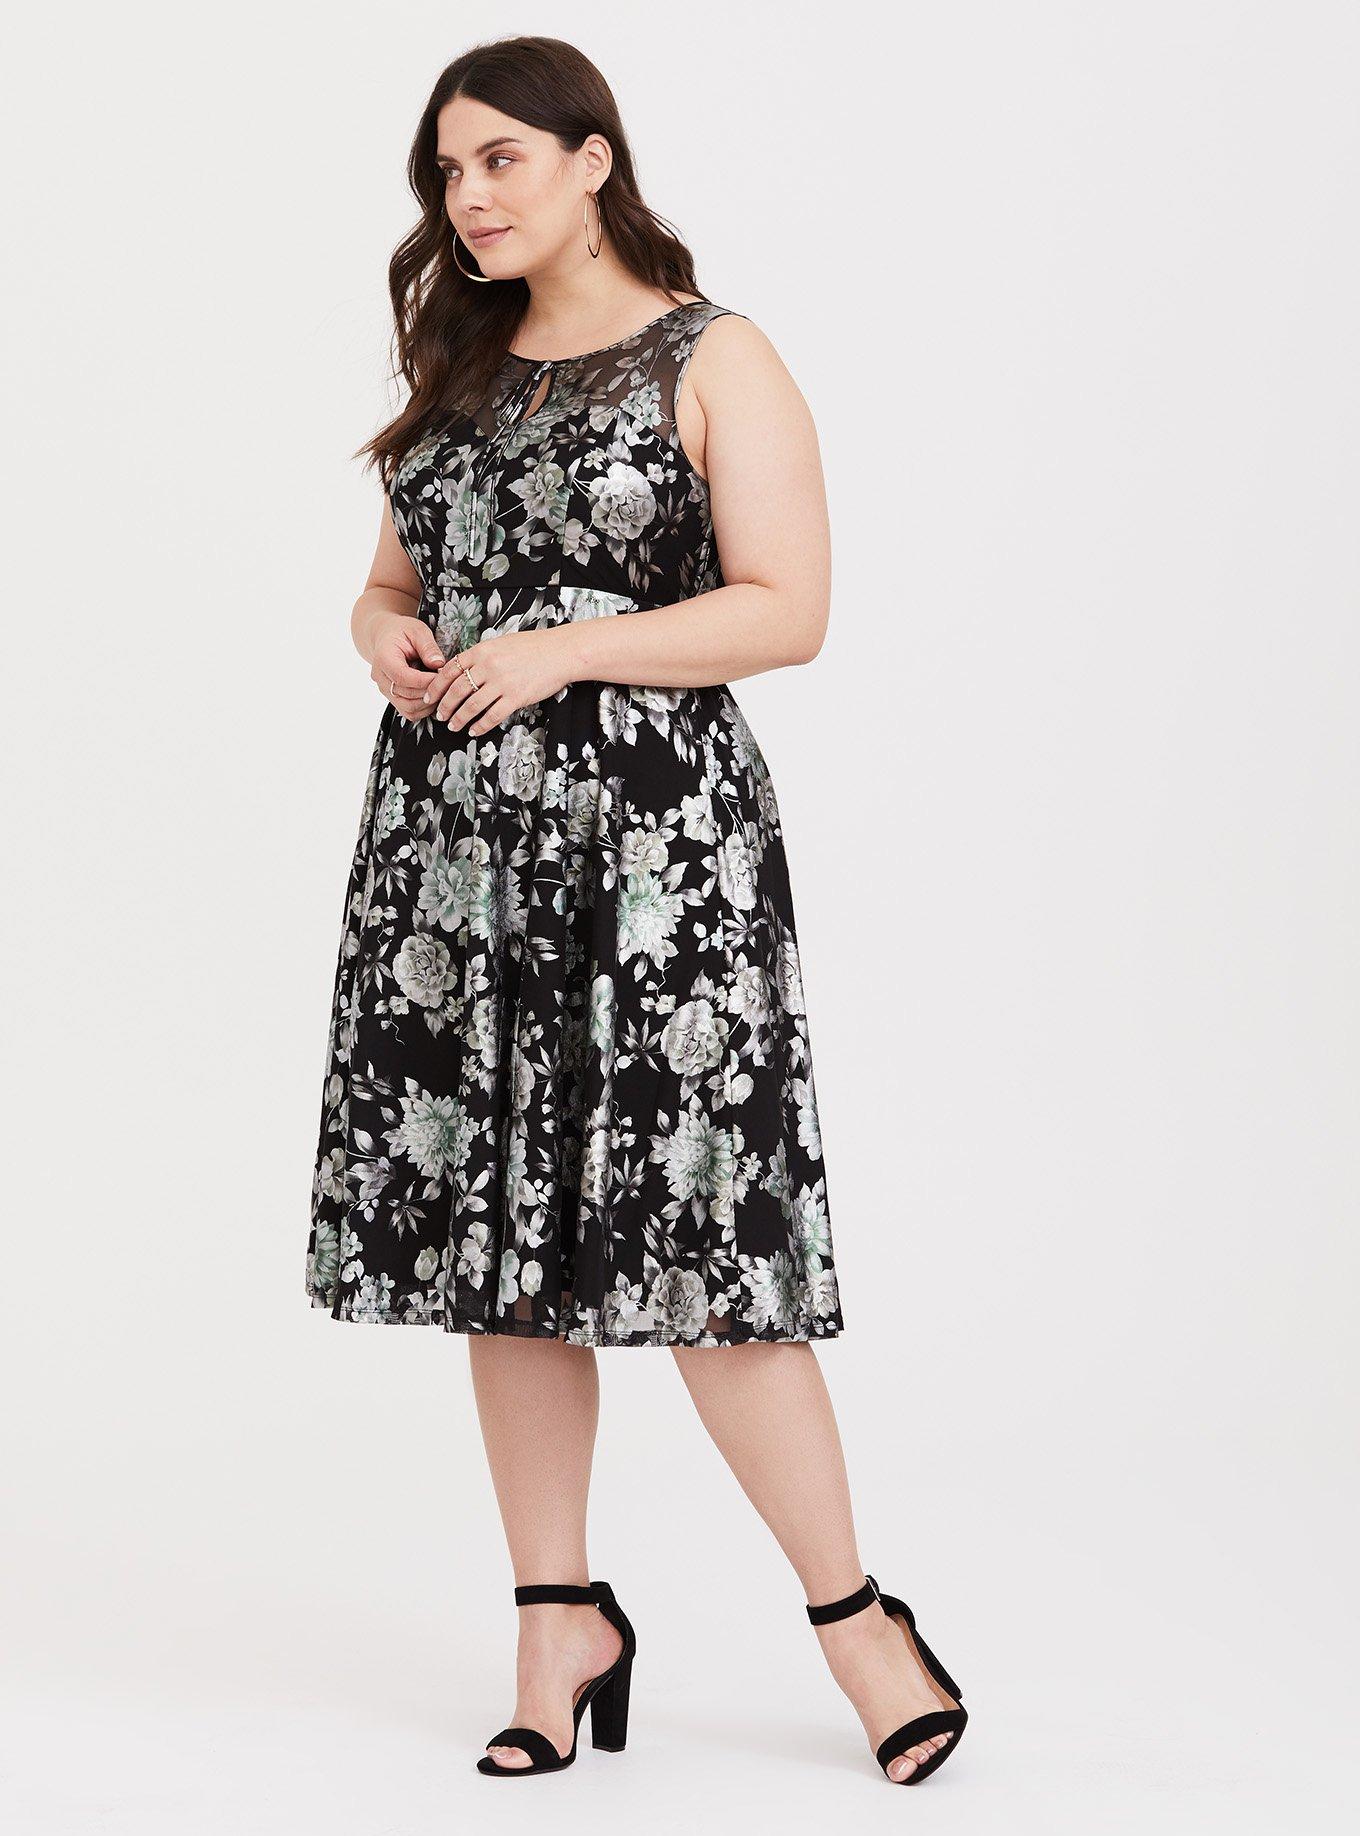 Torrid Takes Us Back With Their Retro Chic Collection Of Summer Dresses